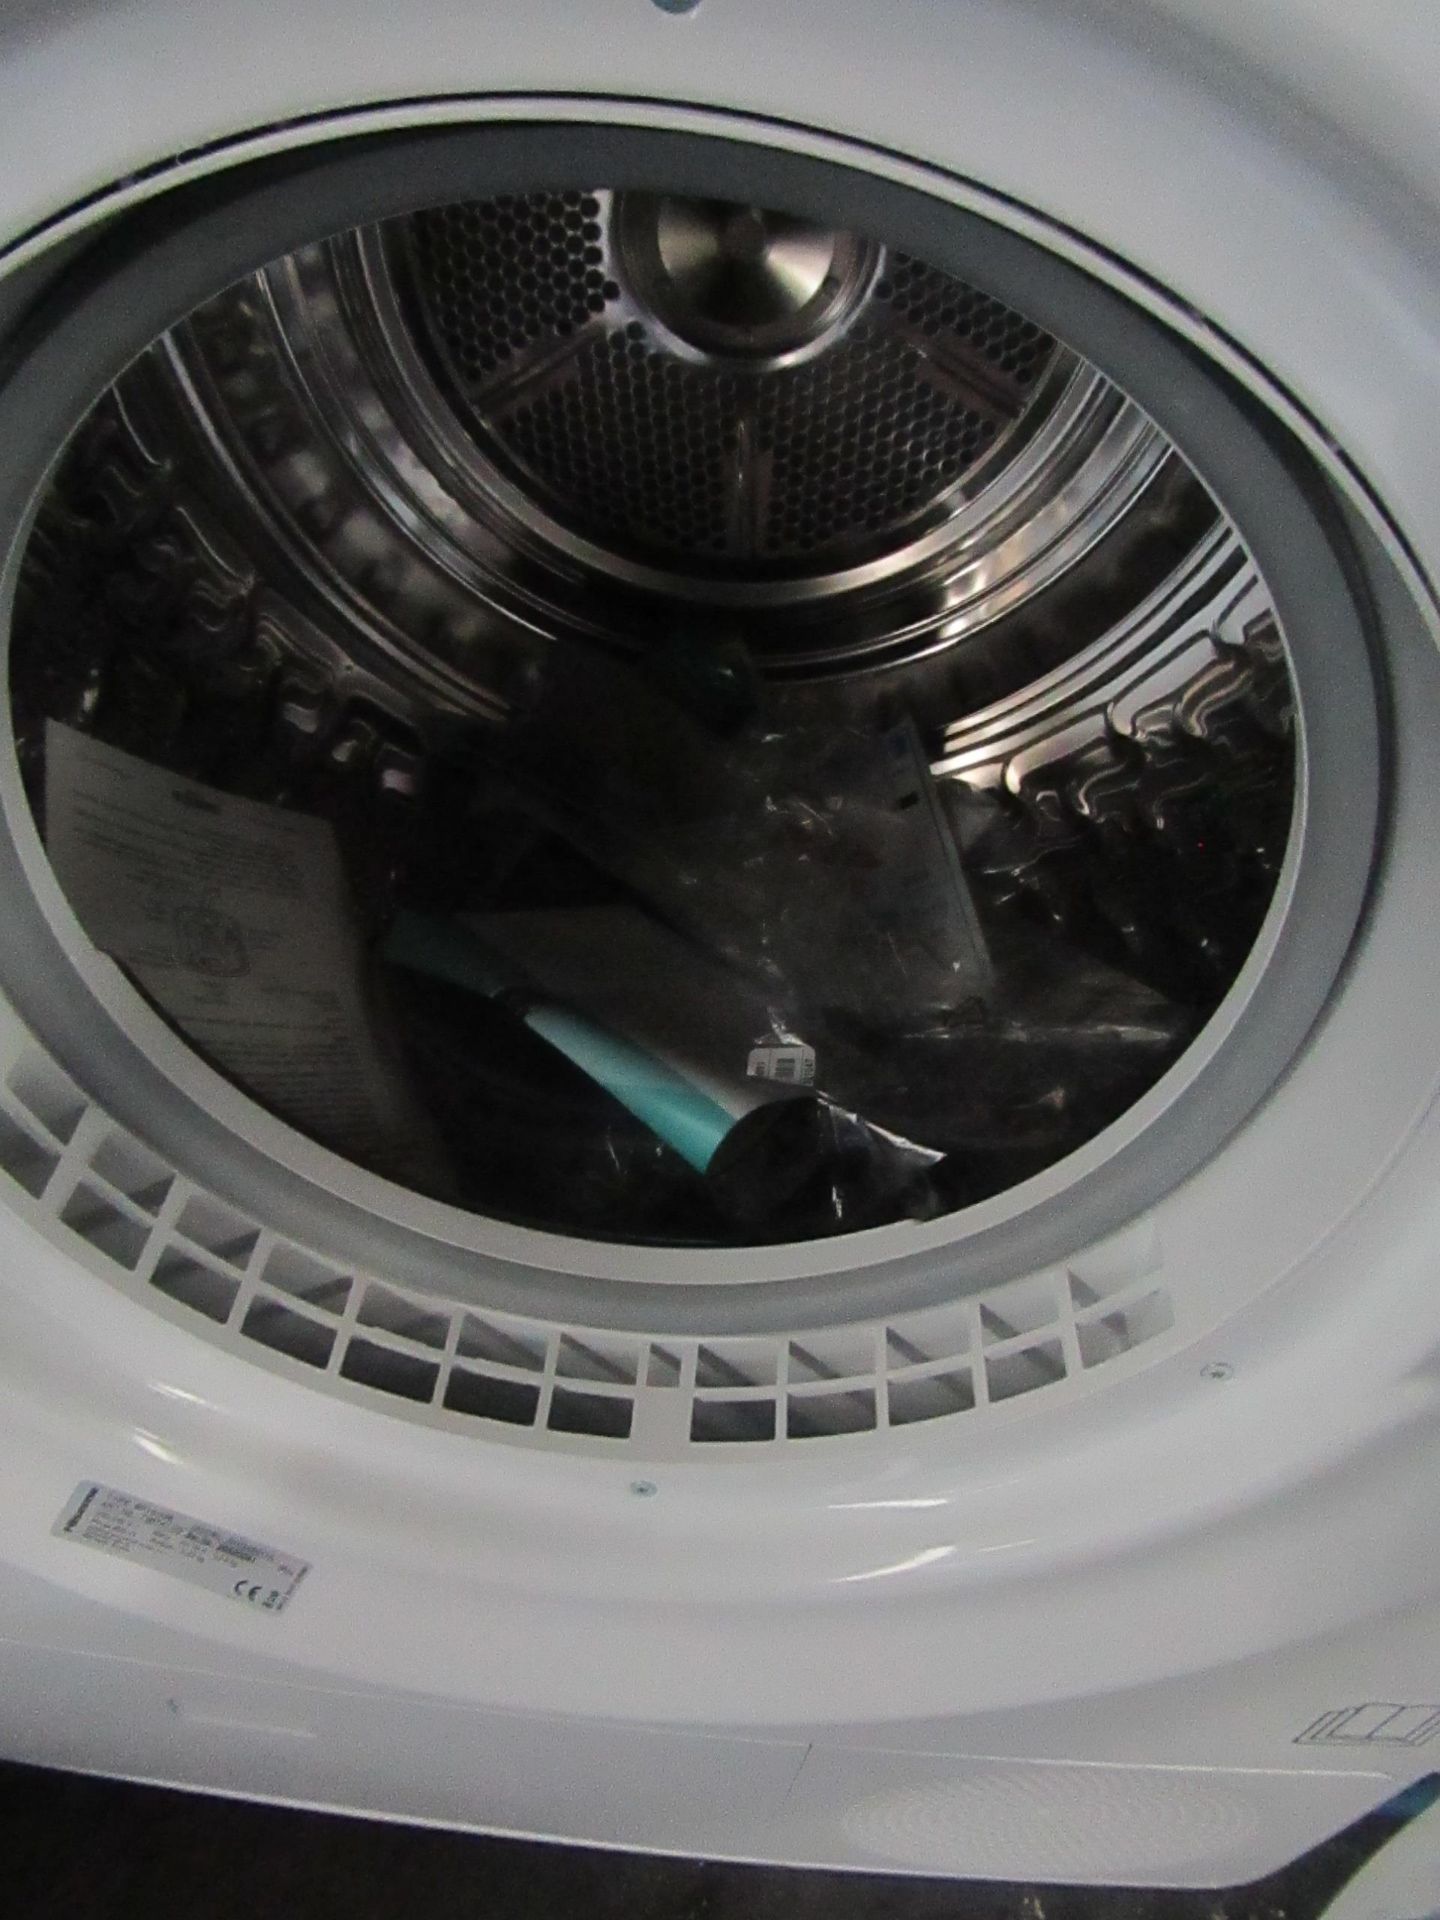 Hisense Heat Pump 9Kg condenser dryer, powers on and spins but display fault codes. - Image 2 of 2